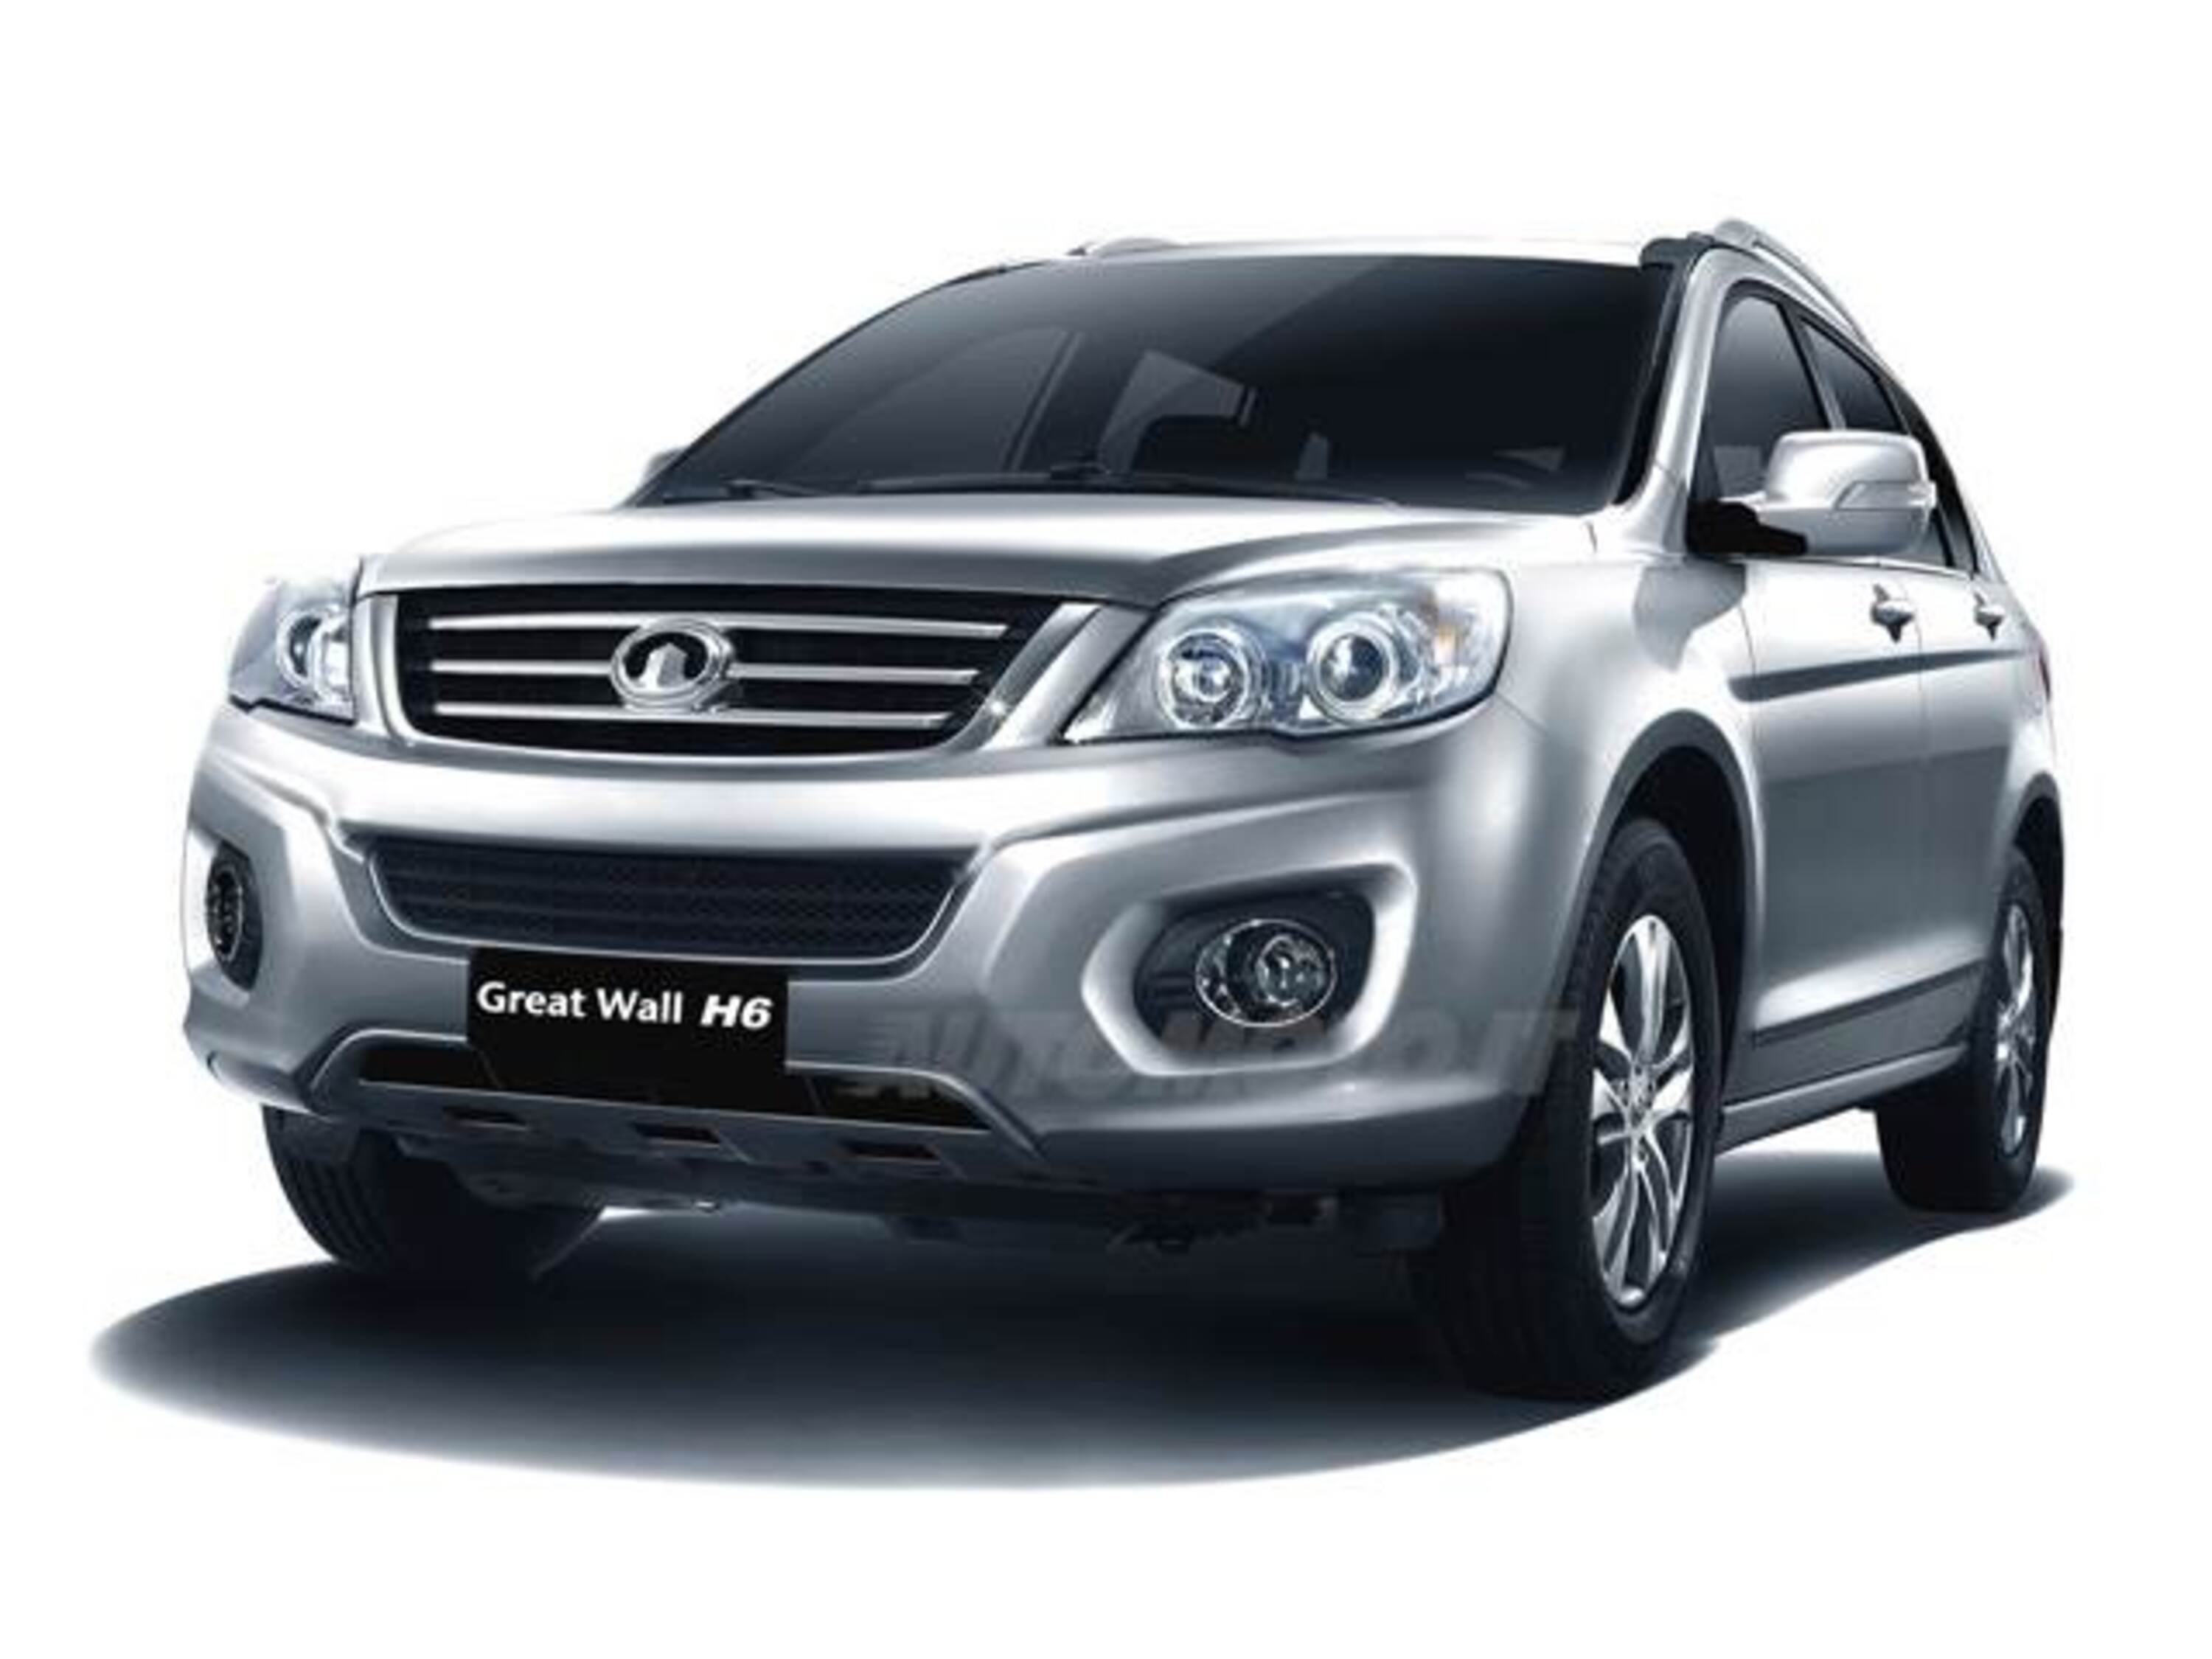 Great Wall H6 H6 2.0 Star 4X4